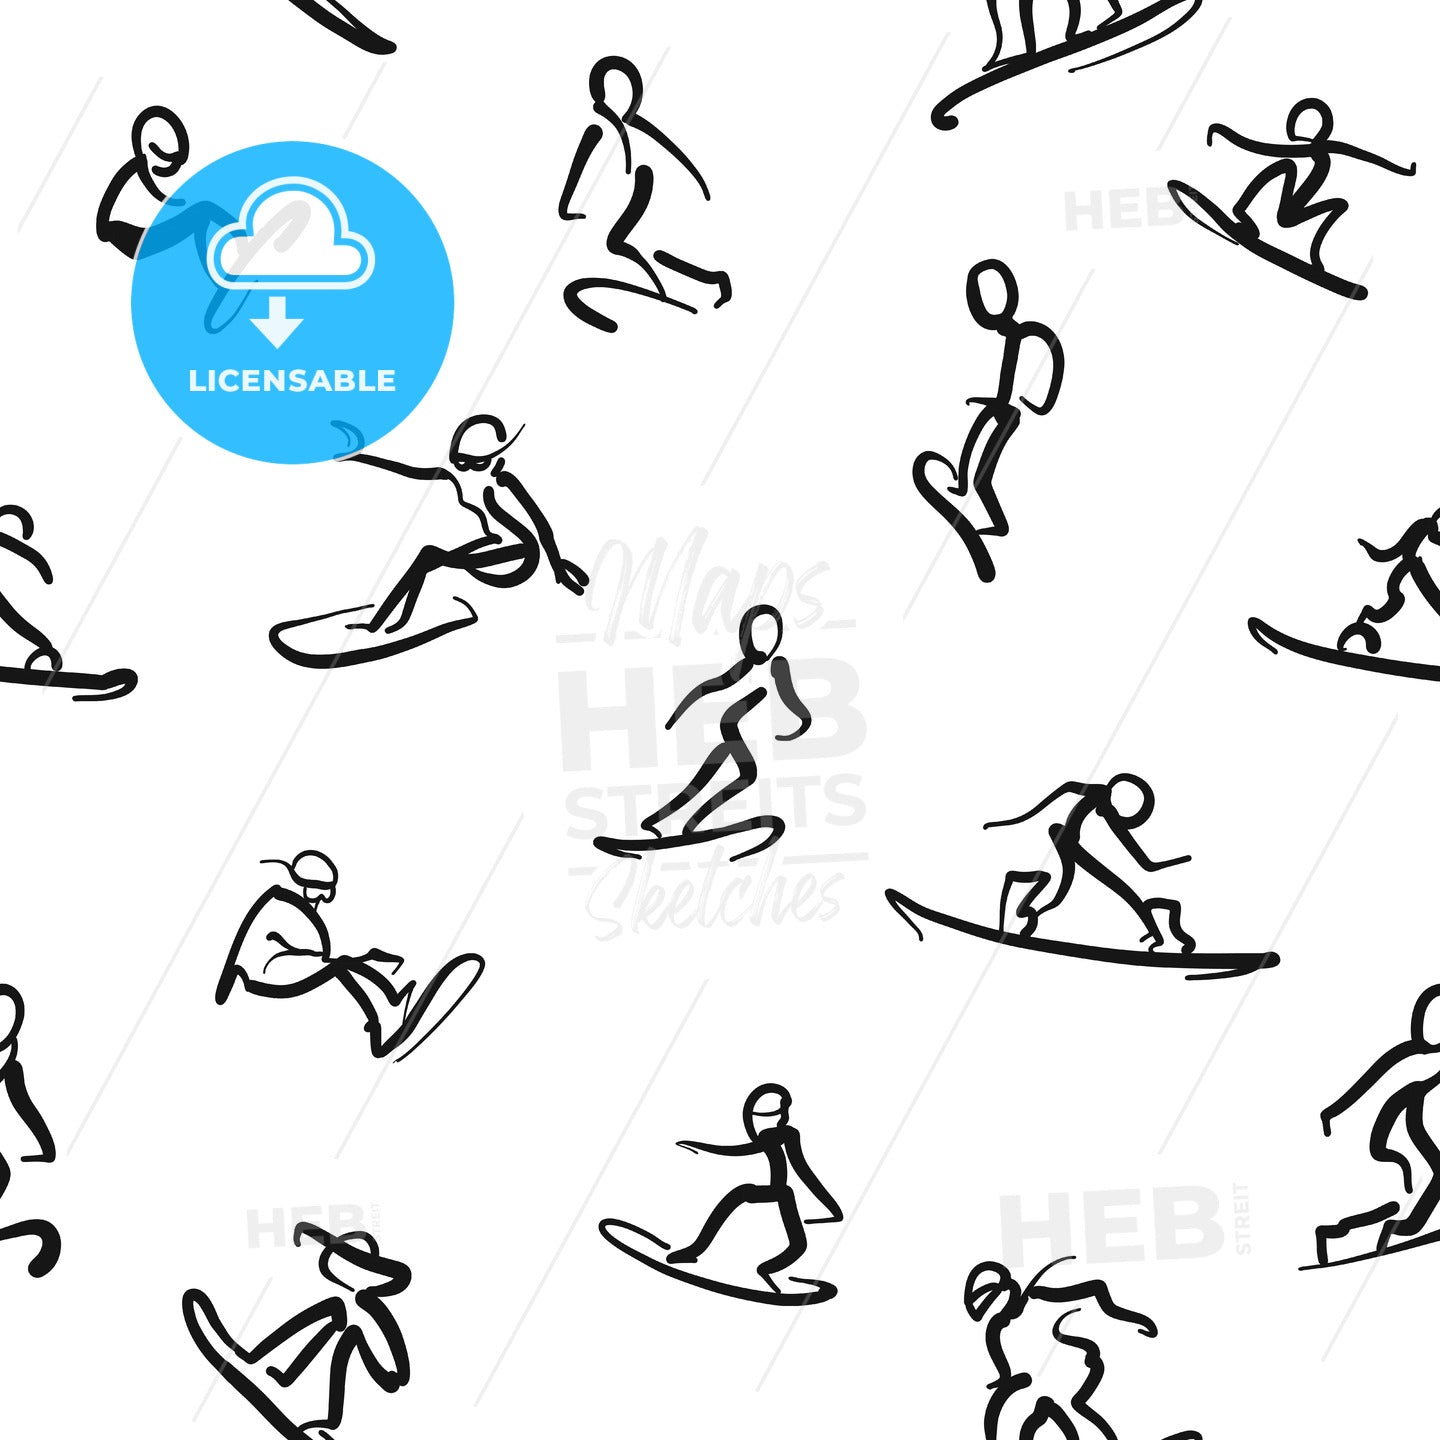 Snowboarding - Calligraphic seamless wall art – instant download